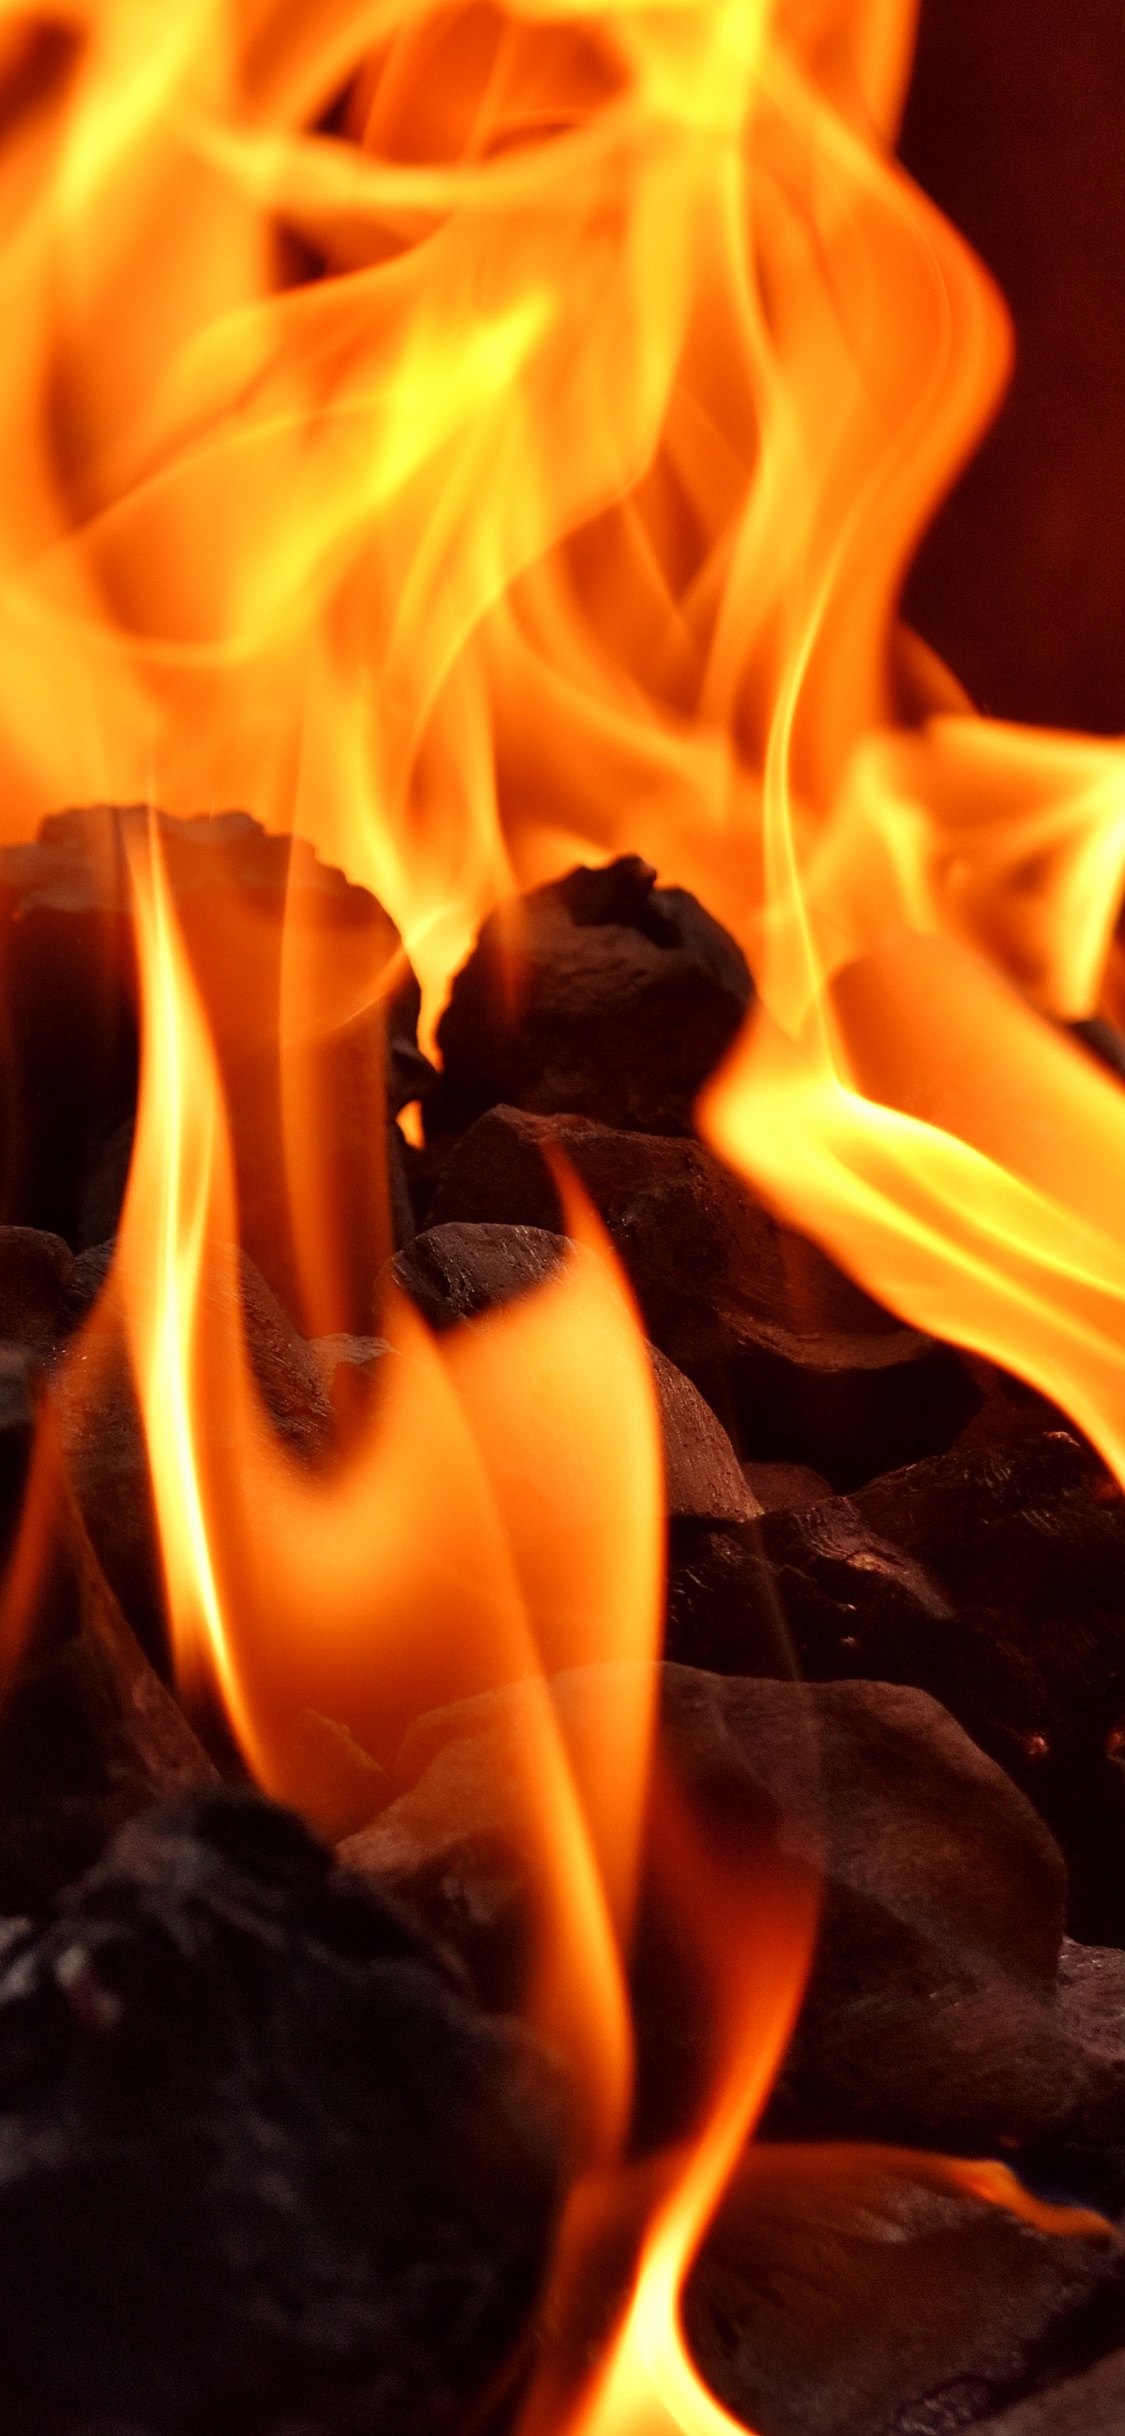 Burning Fire on Black Textile. Wallpaper in 1125x2436 Resolution